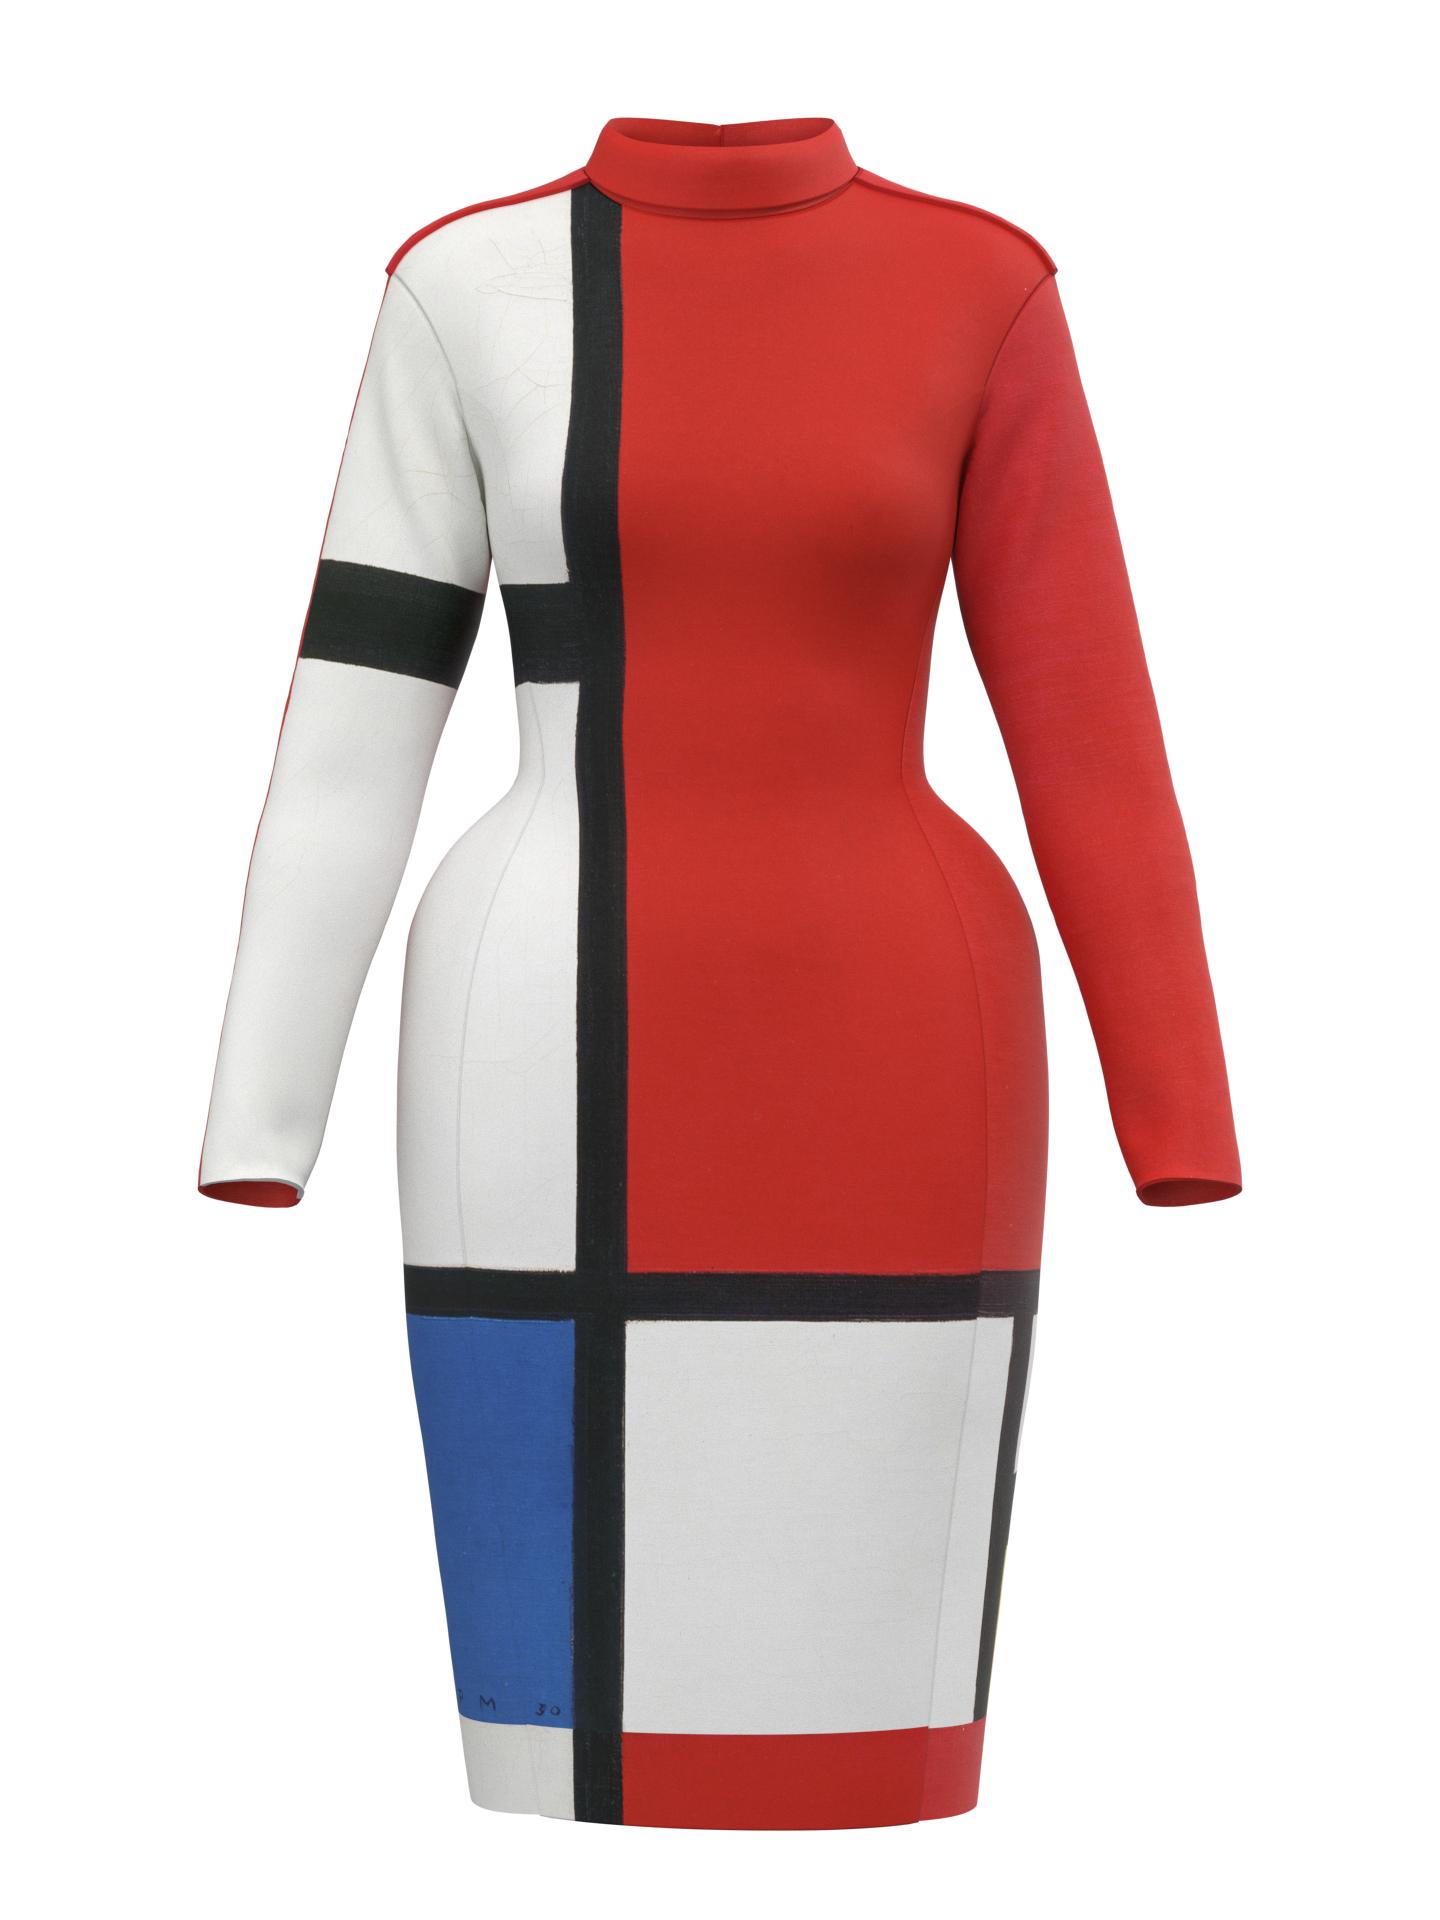 Space Dress-Composition with Red, Blue and Yellow by DRESSX PIET MONDRIAN